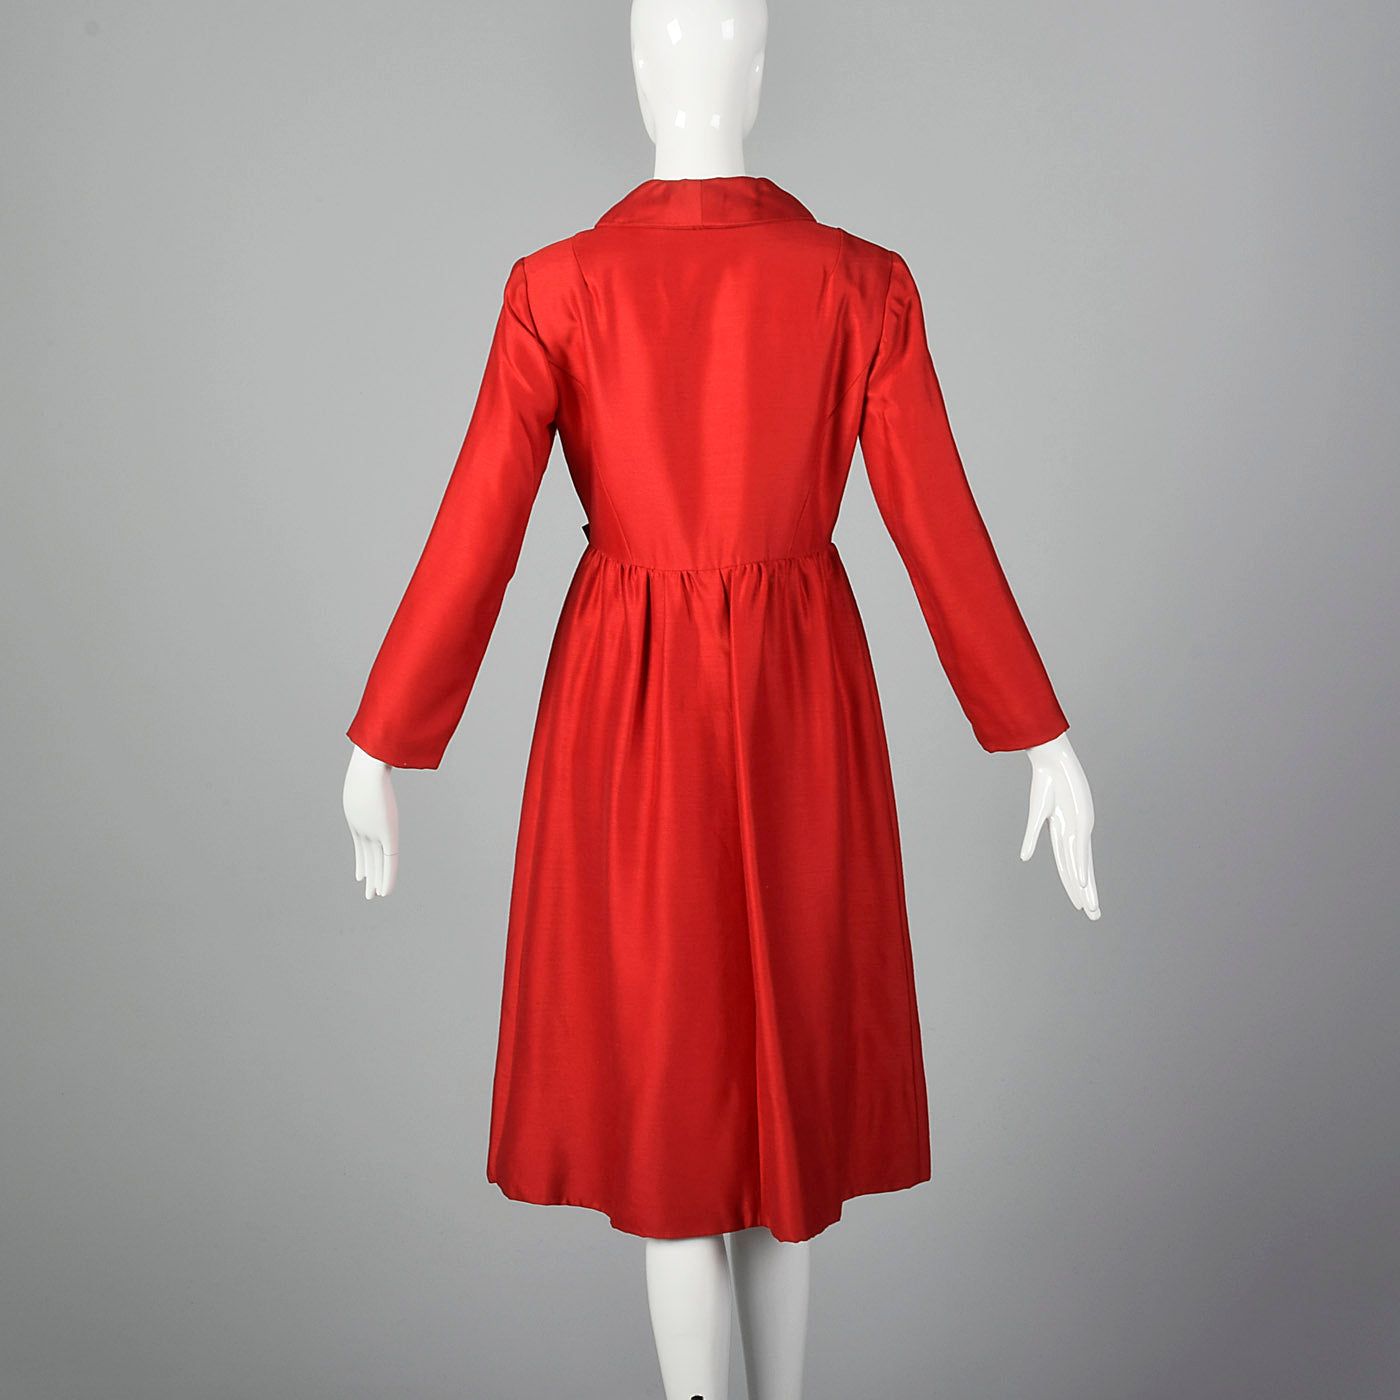 1950s Bright Red Dress Coat – Style & Salvage